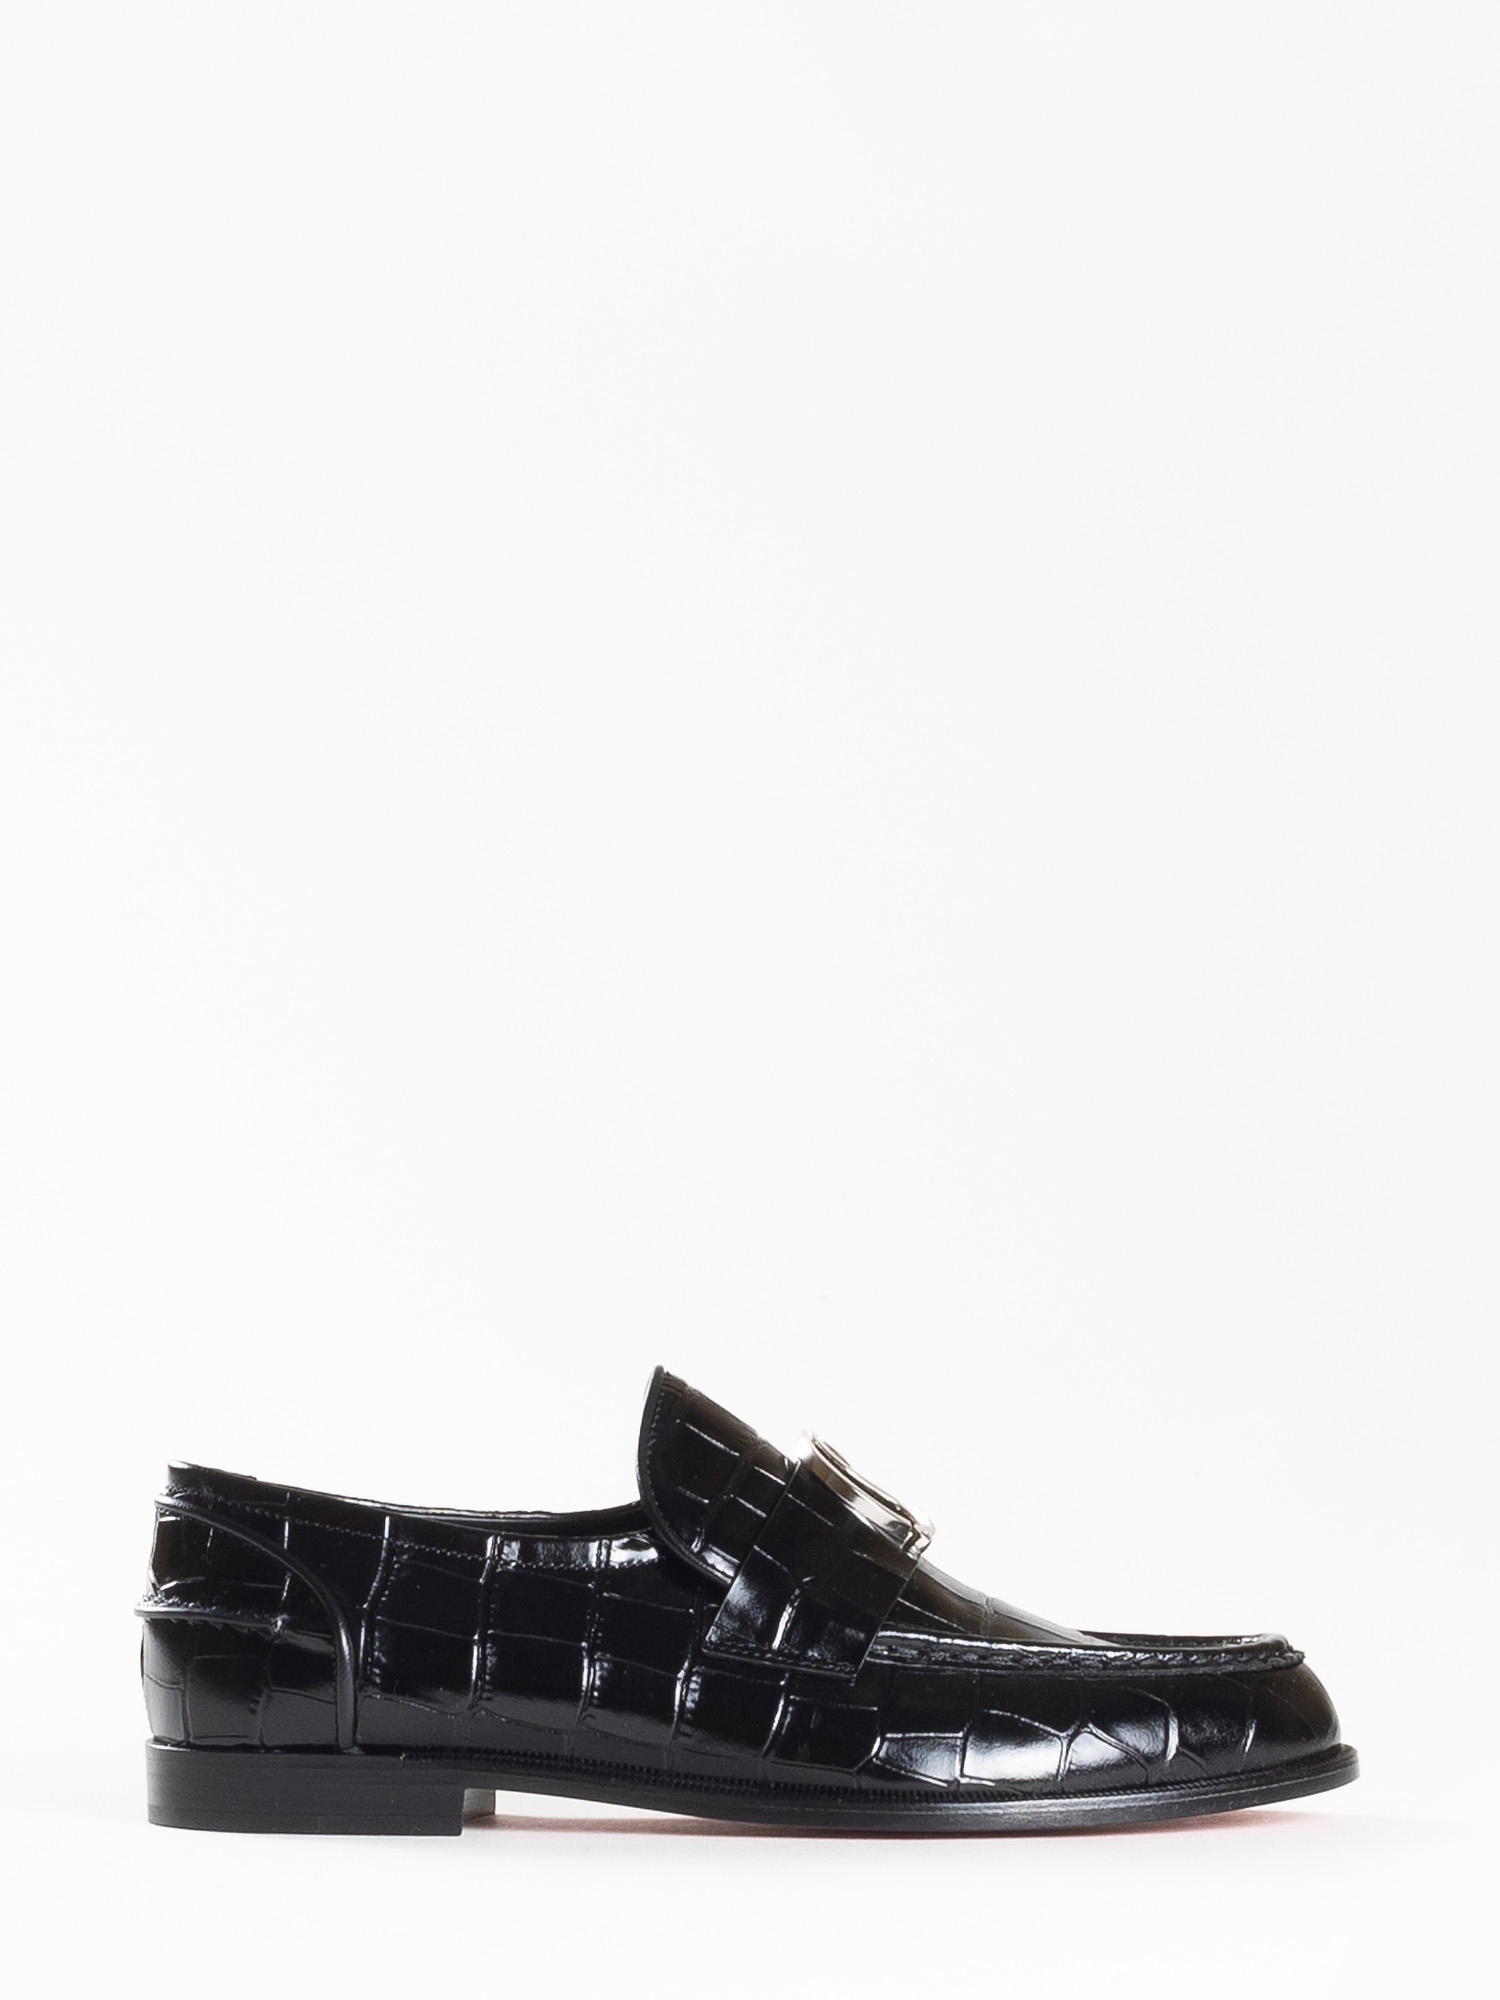 LEATHER LOAFERS - CHRISTIAN LOUBOUTIN